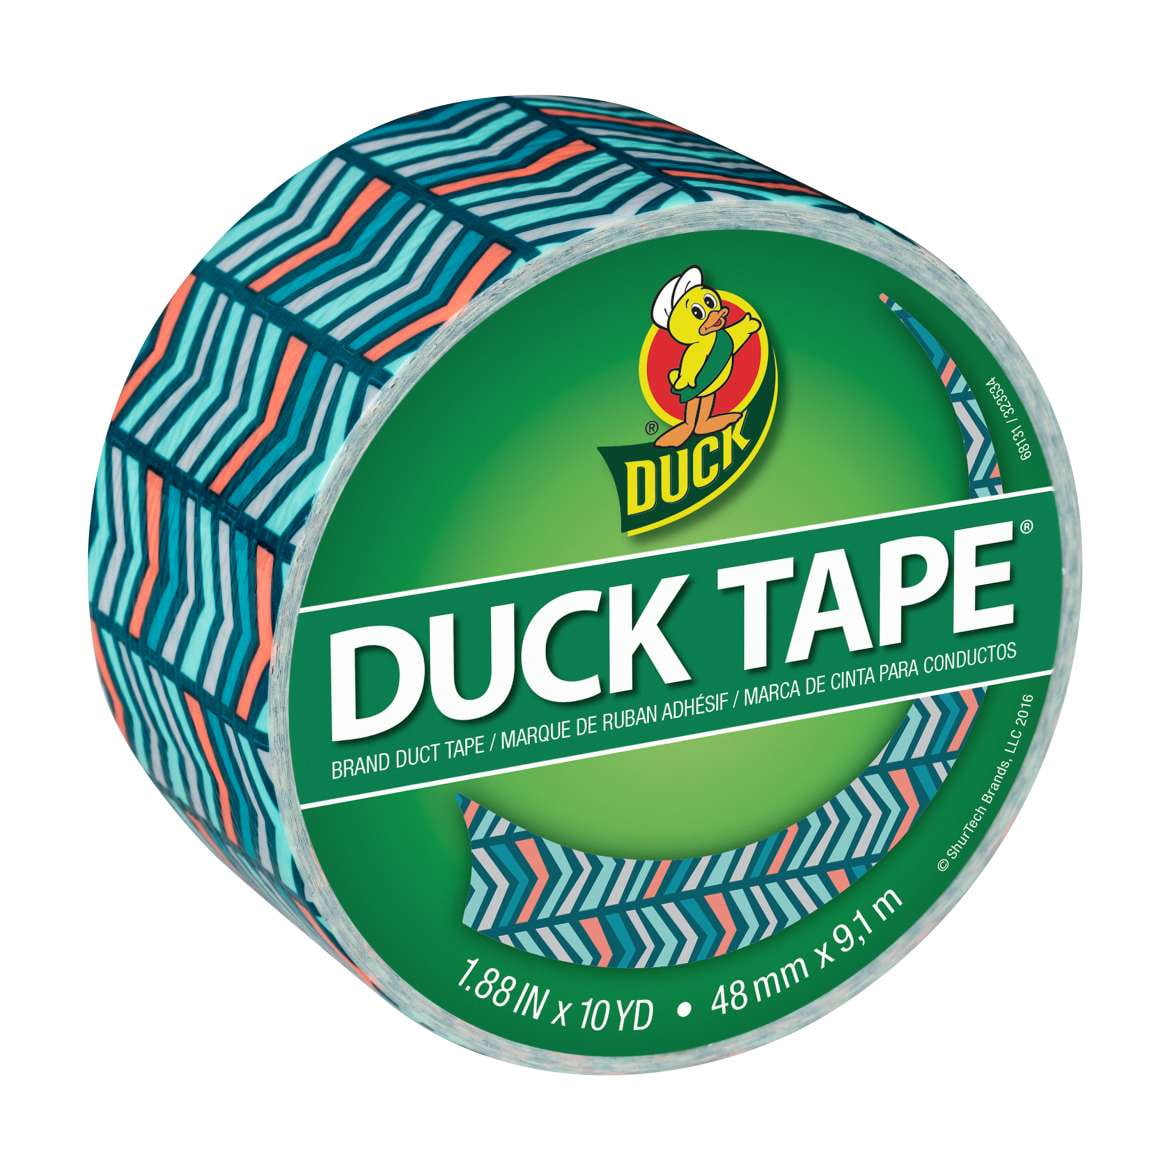 Duck Brand Printed Duct Tape Patterns: 1.88 in x 30 ft. (Brushed Stripes)